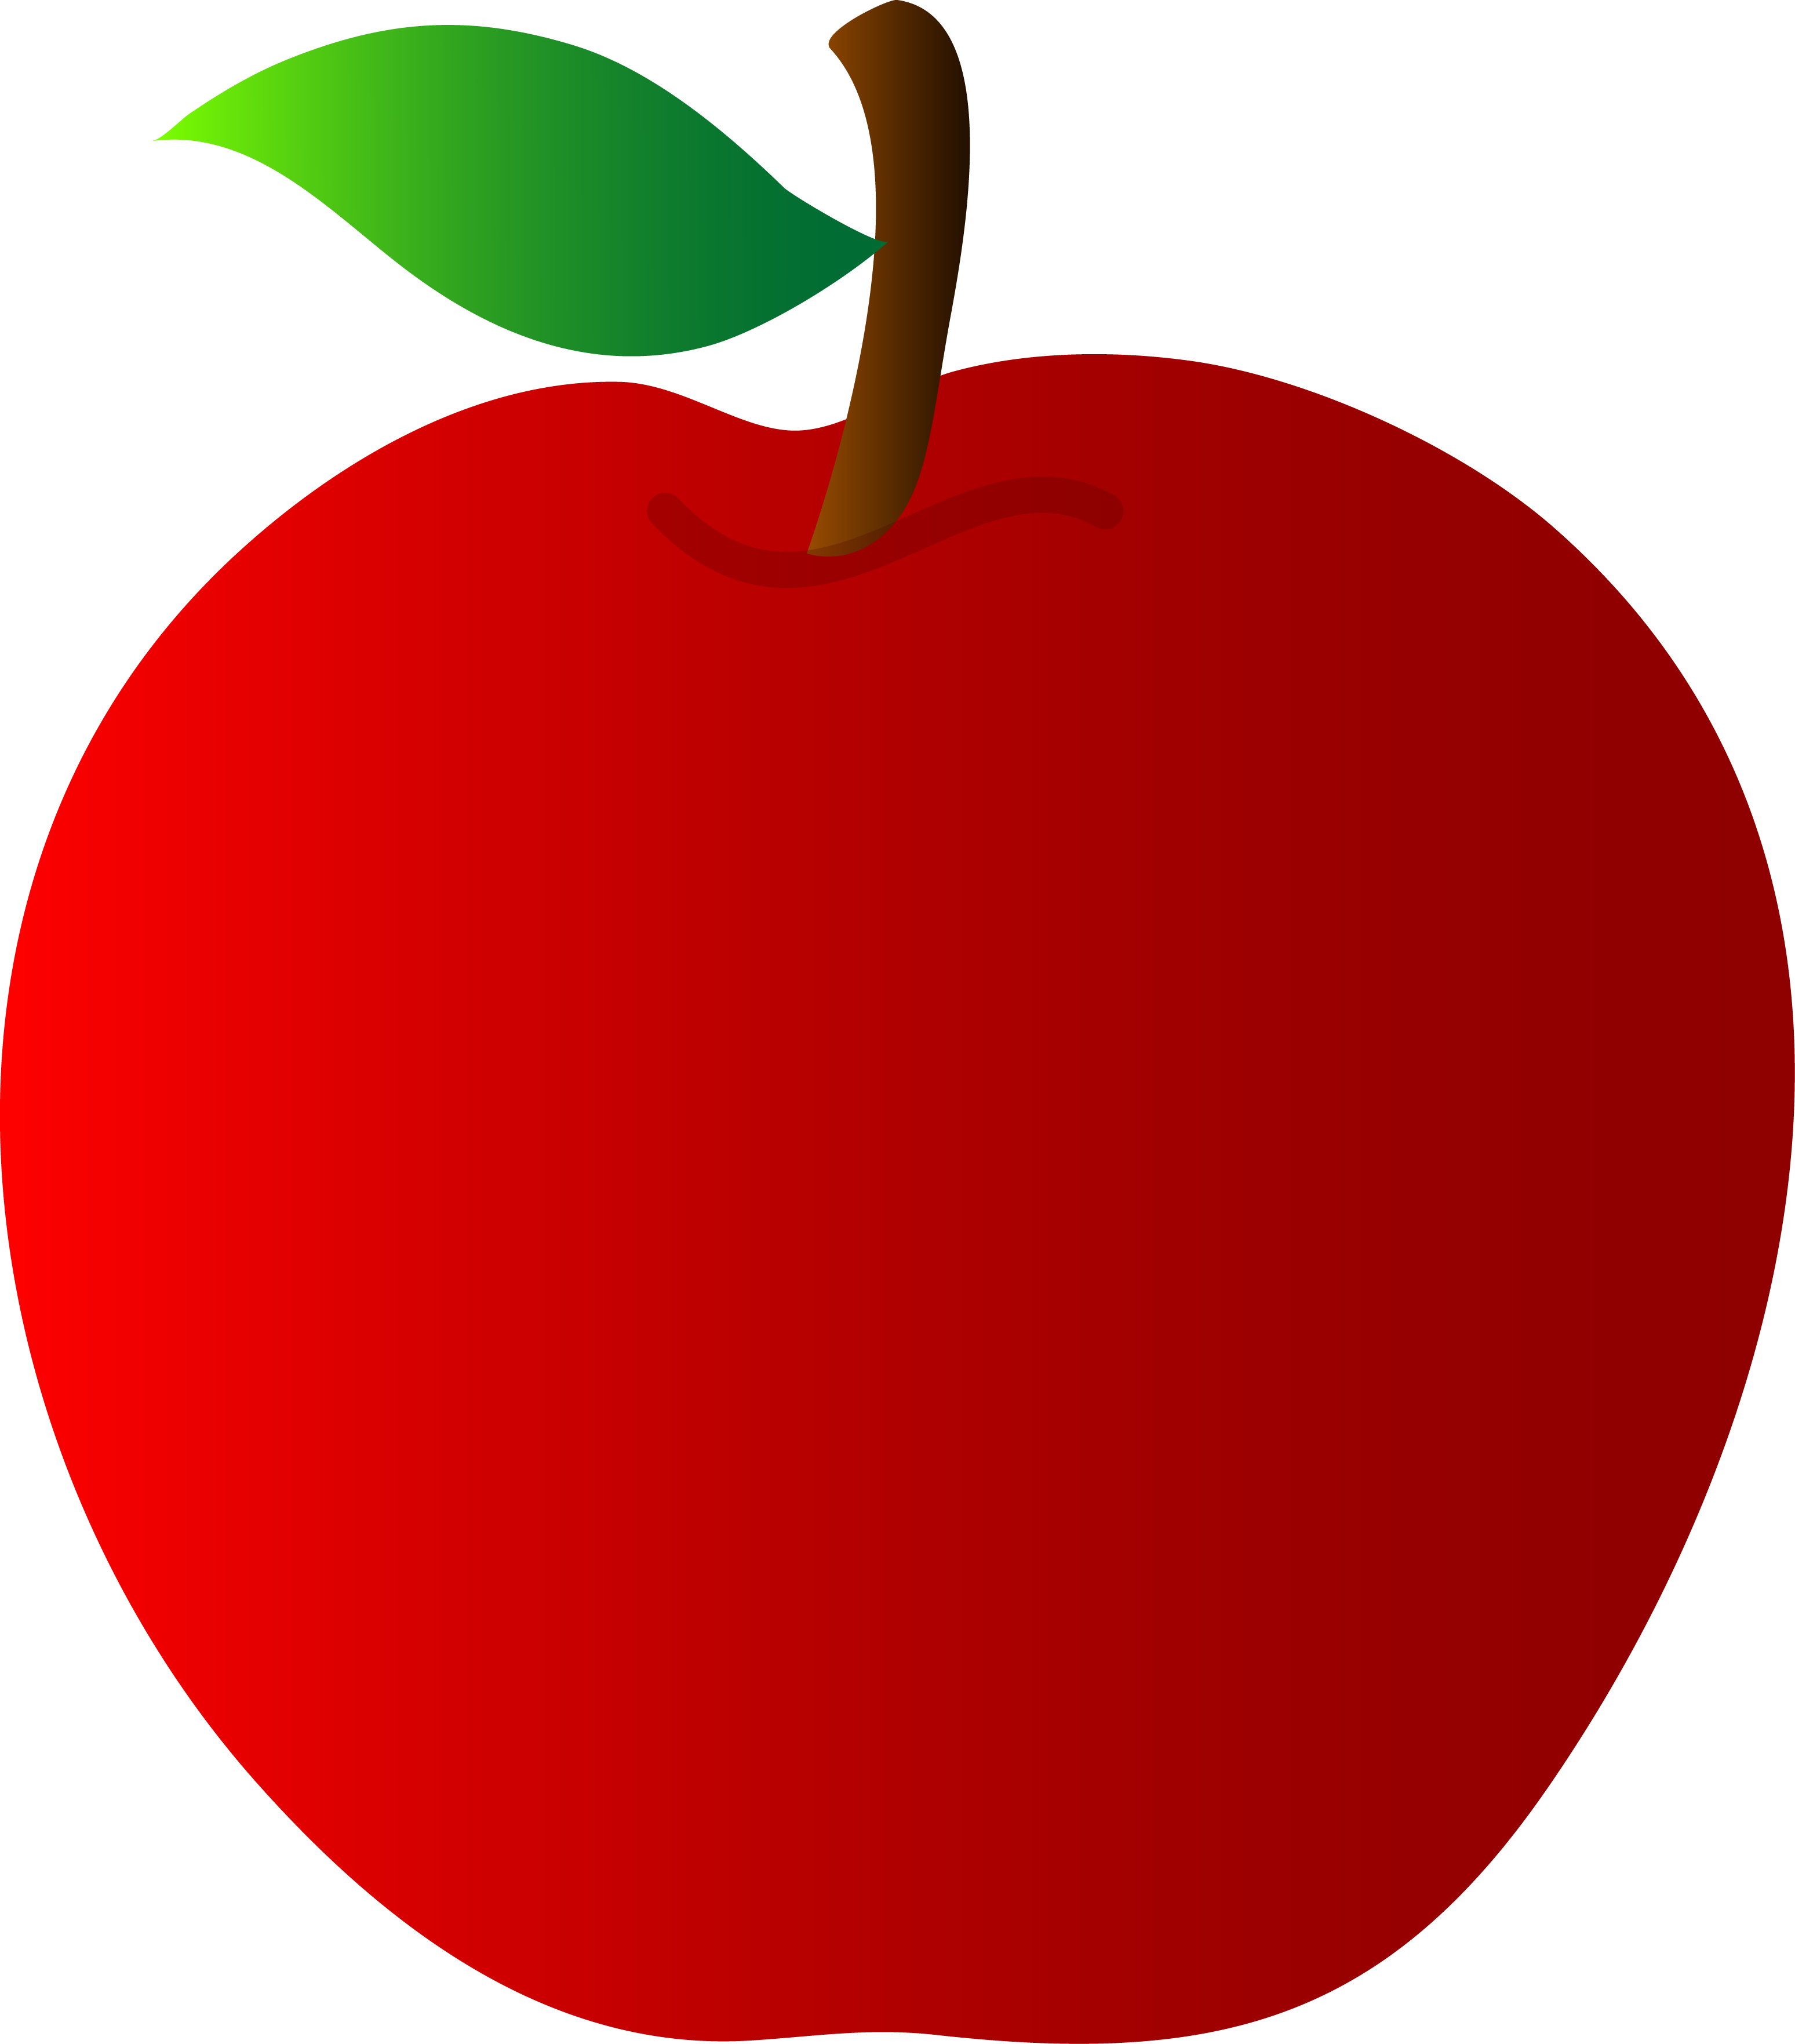 Red Apples Clipart Images Pictures - Becuo